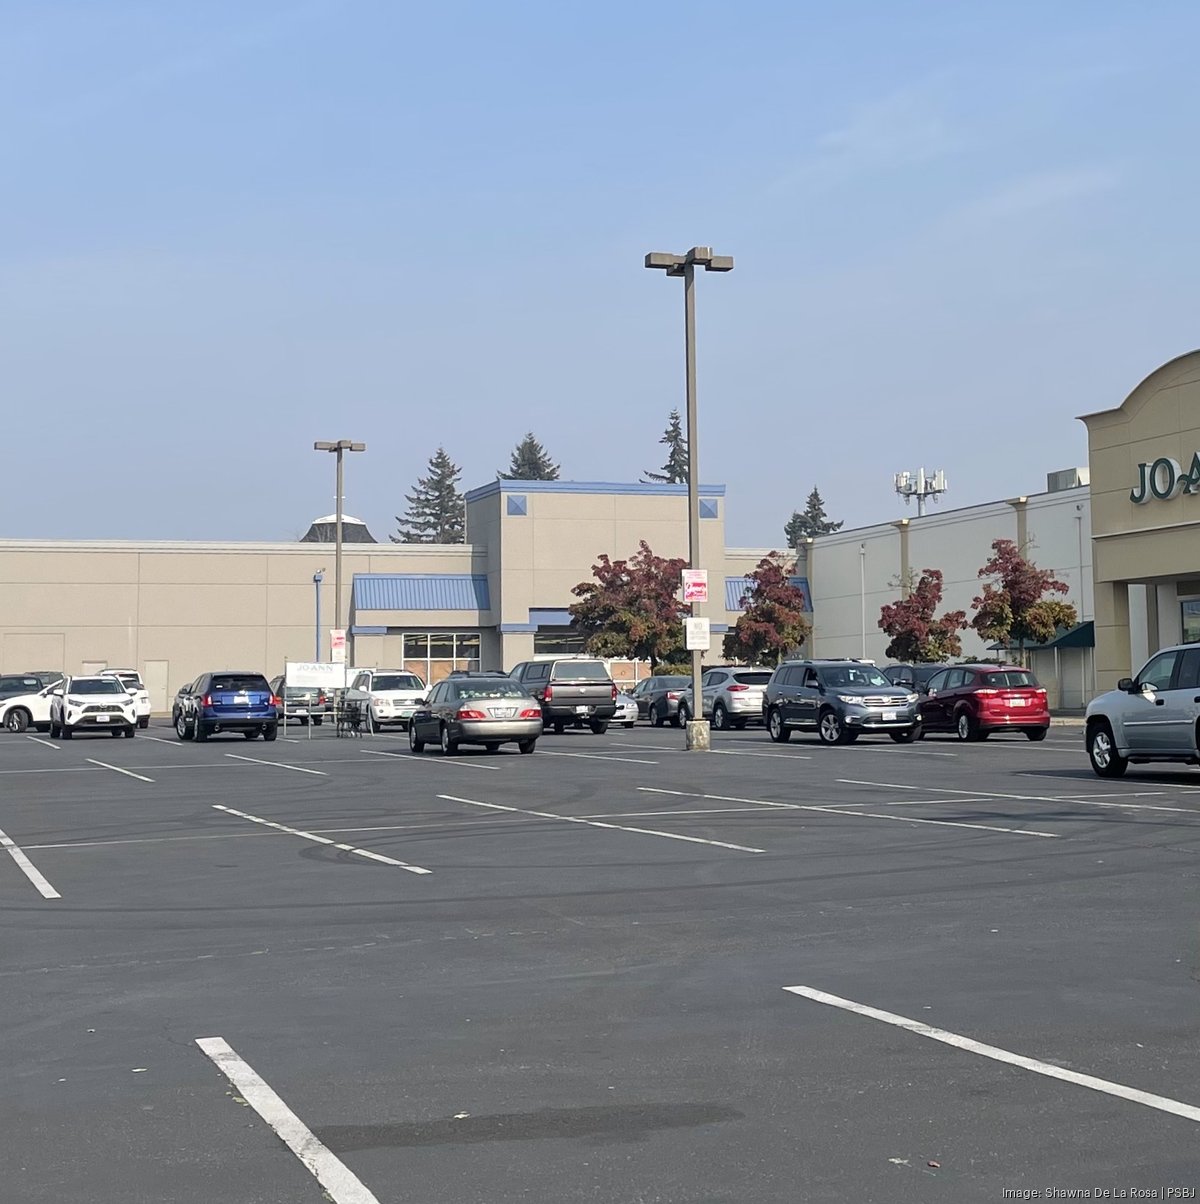 Valley Mall breaks records with Nordstrom Rack opening, plans to